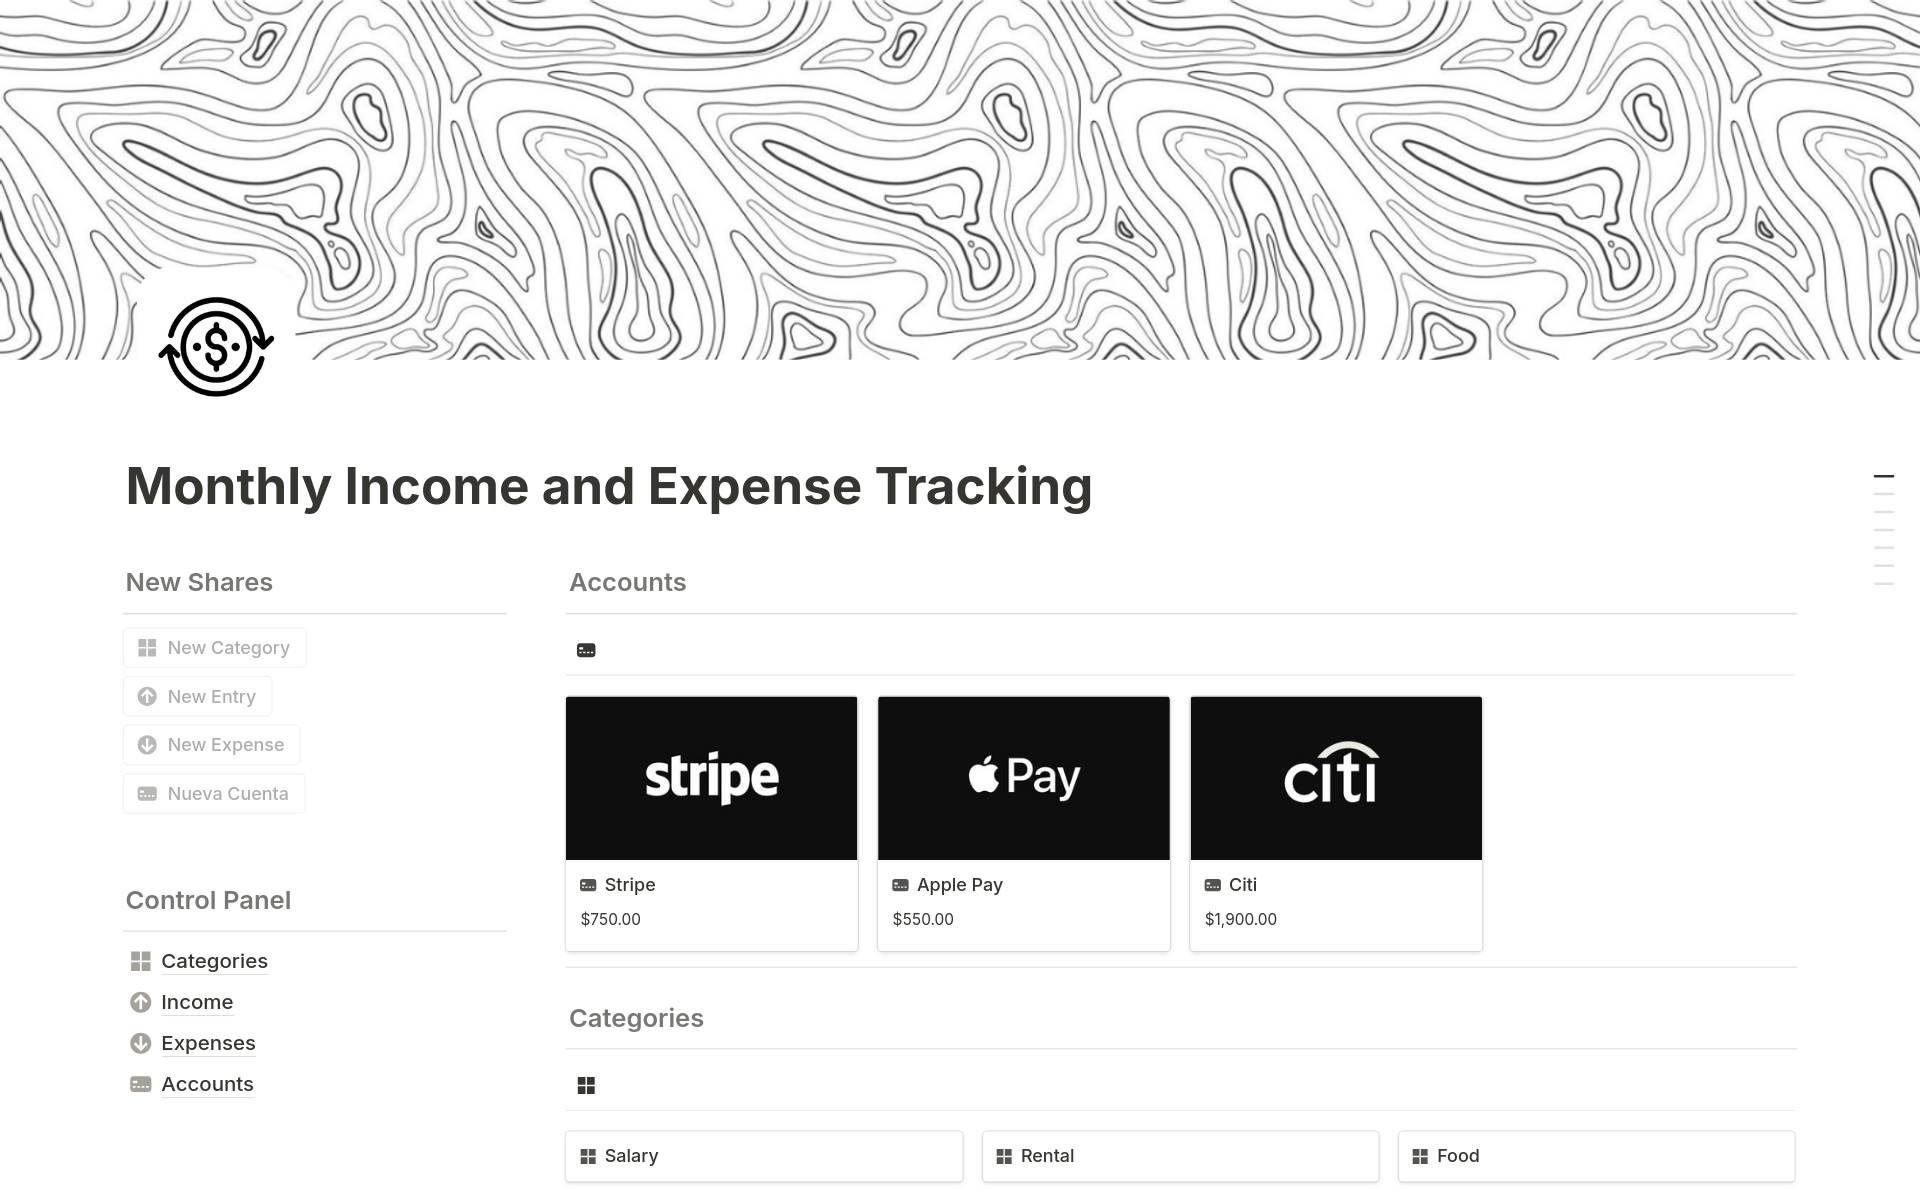 Monthly Income and Expense Tracking님의 템플릿 미리보기